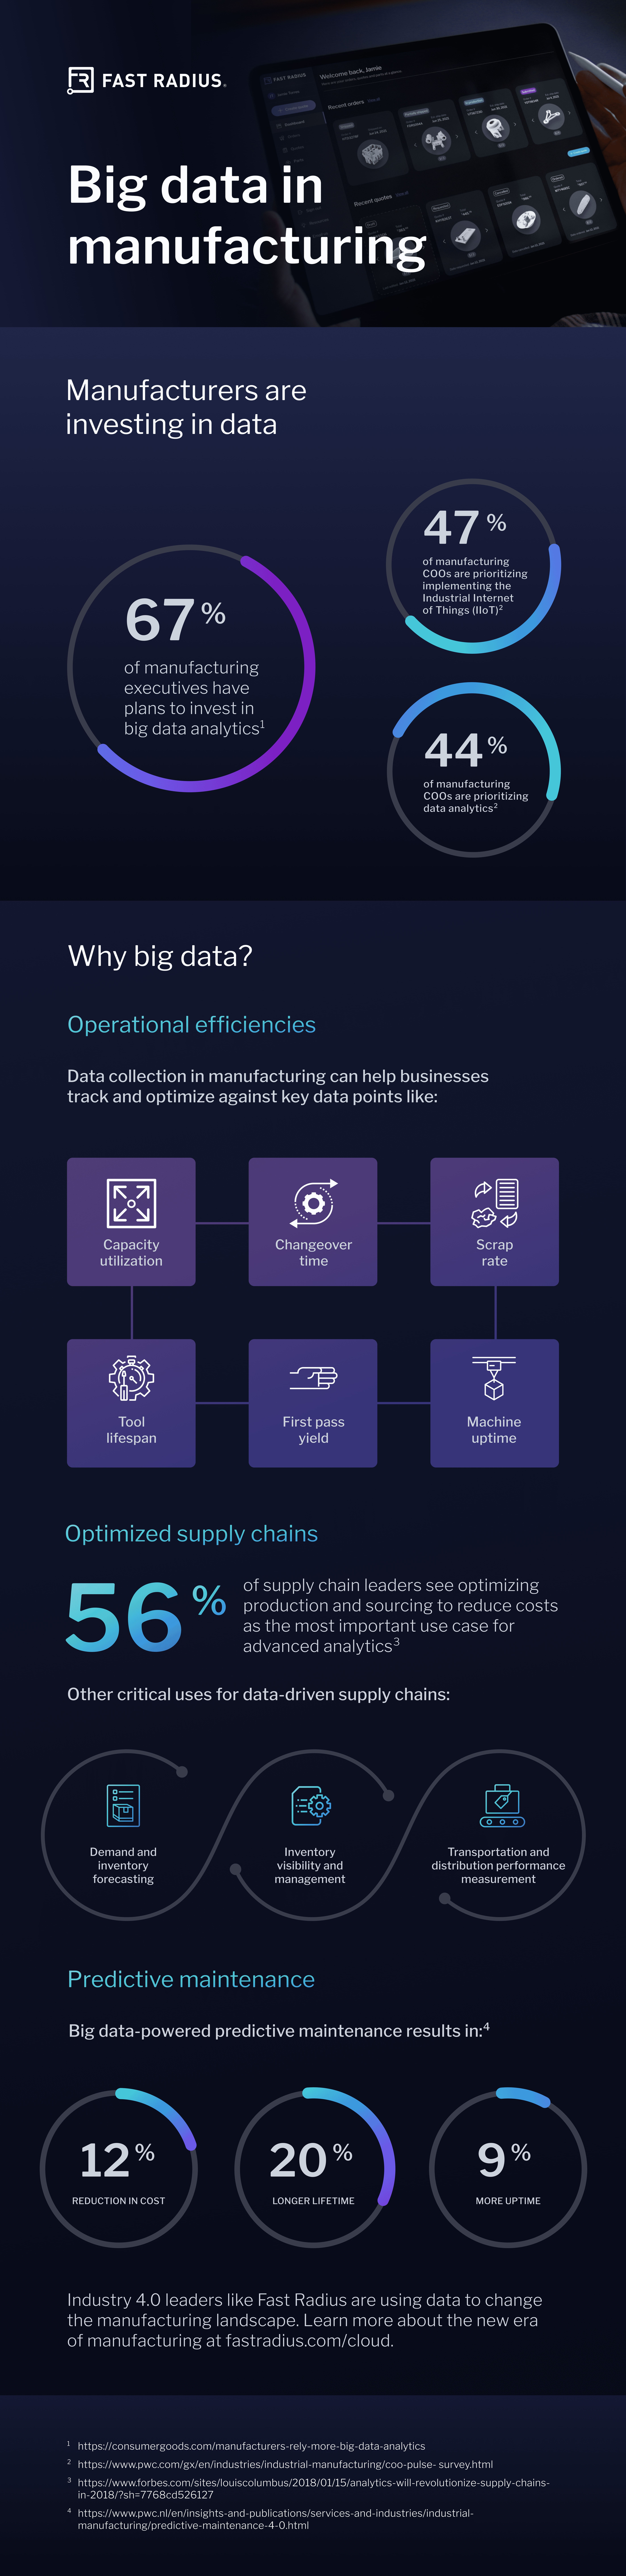 Big data in manufacturing infographic